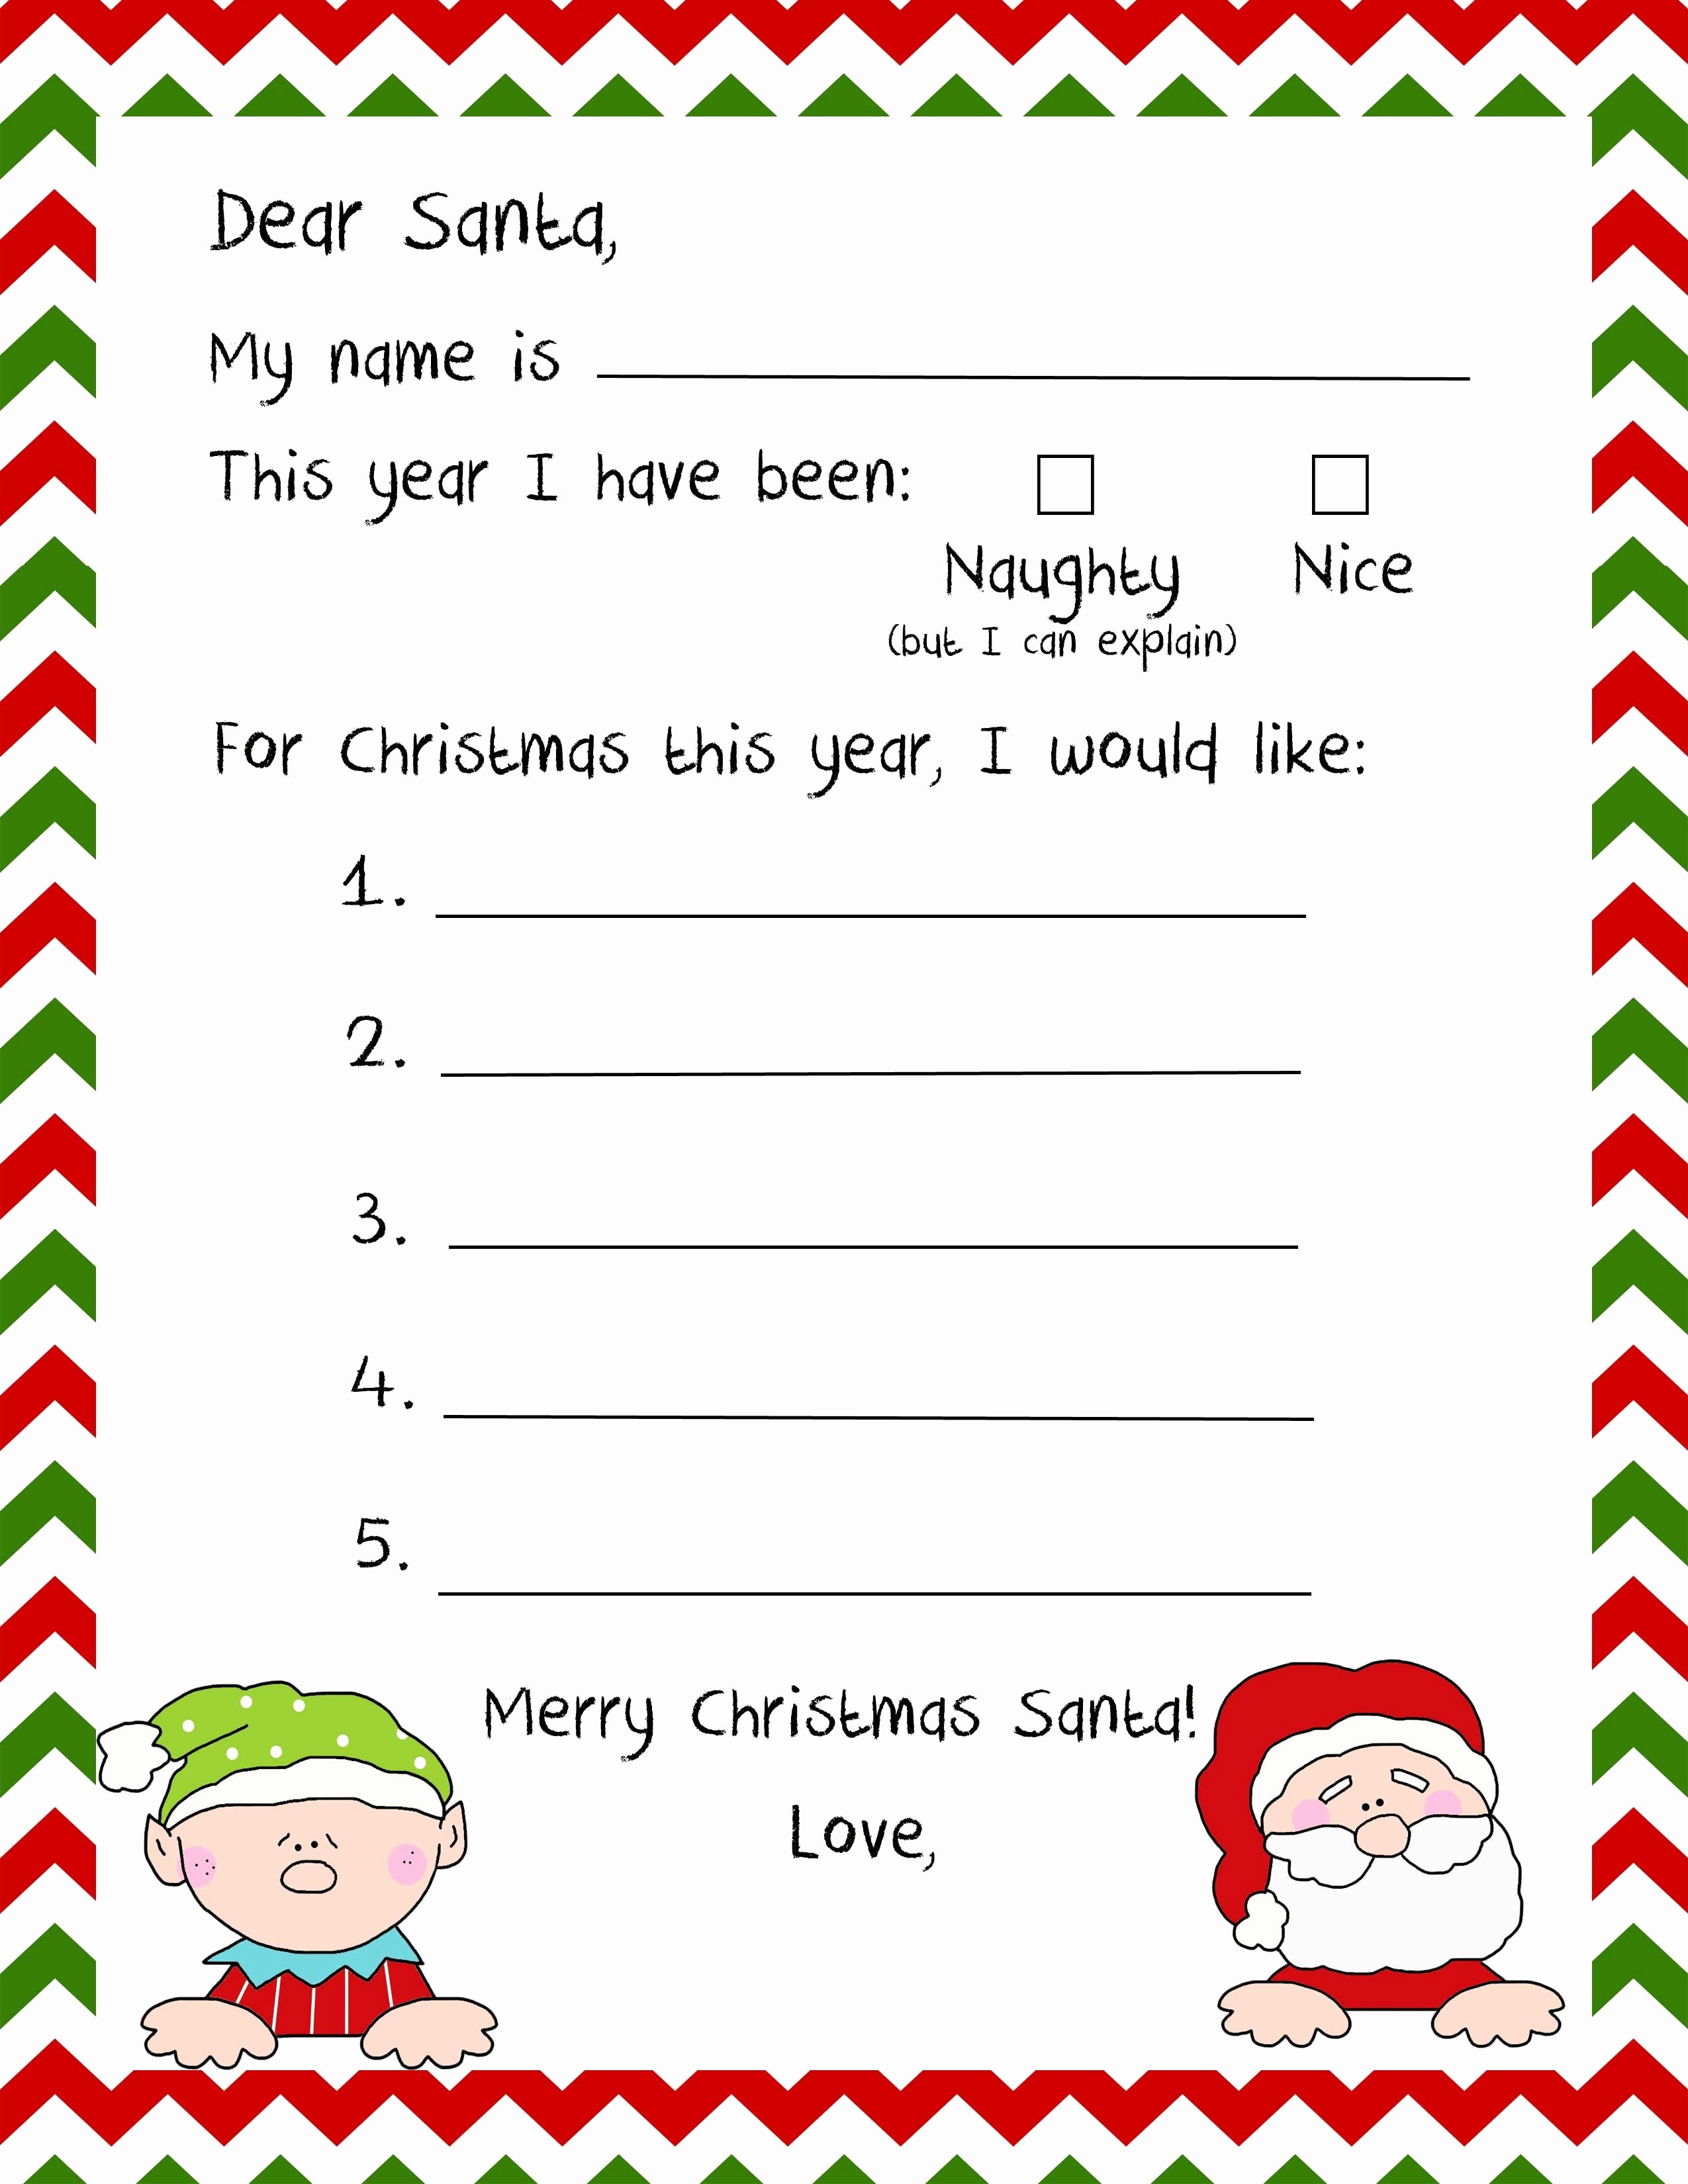 Letter to Santa Claus Templates Awesome 20 Letters to Santa and Printable Envelopes – Christmas